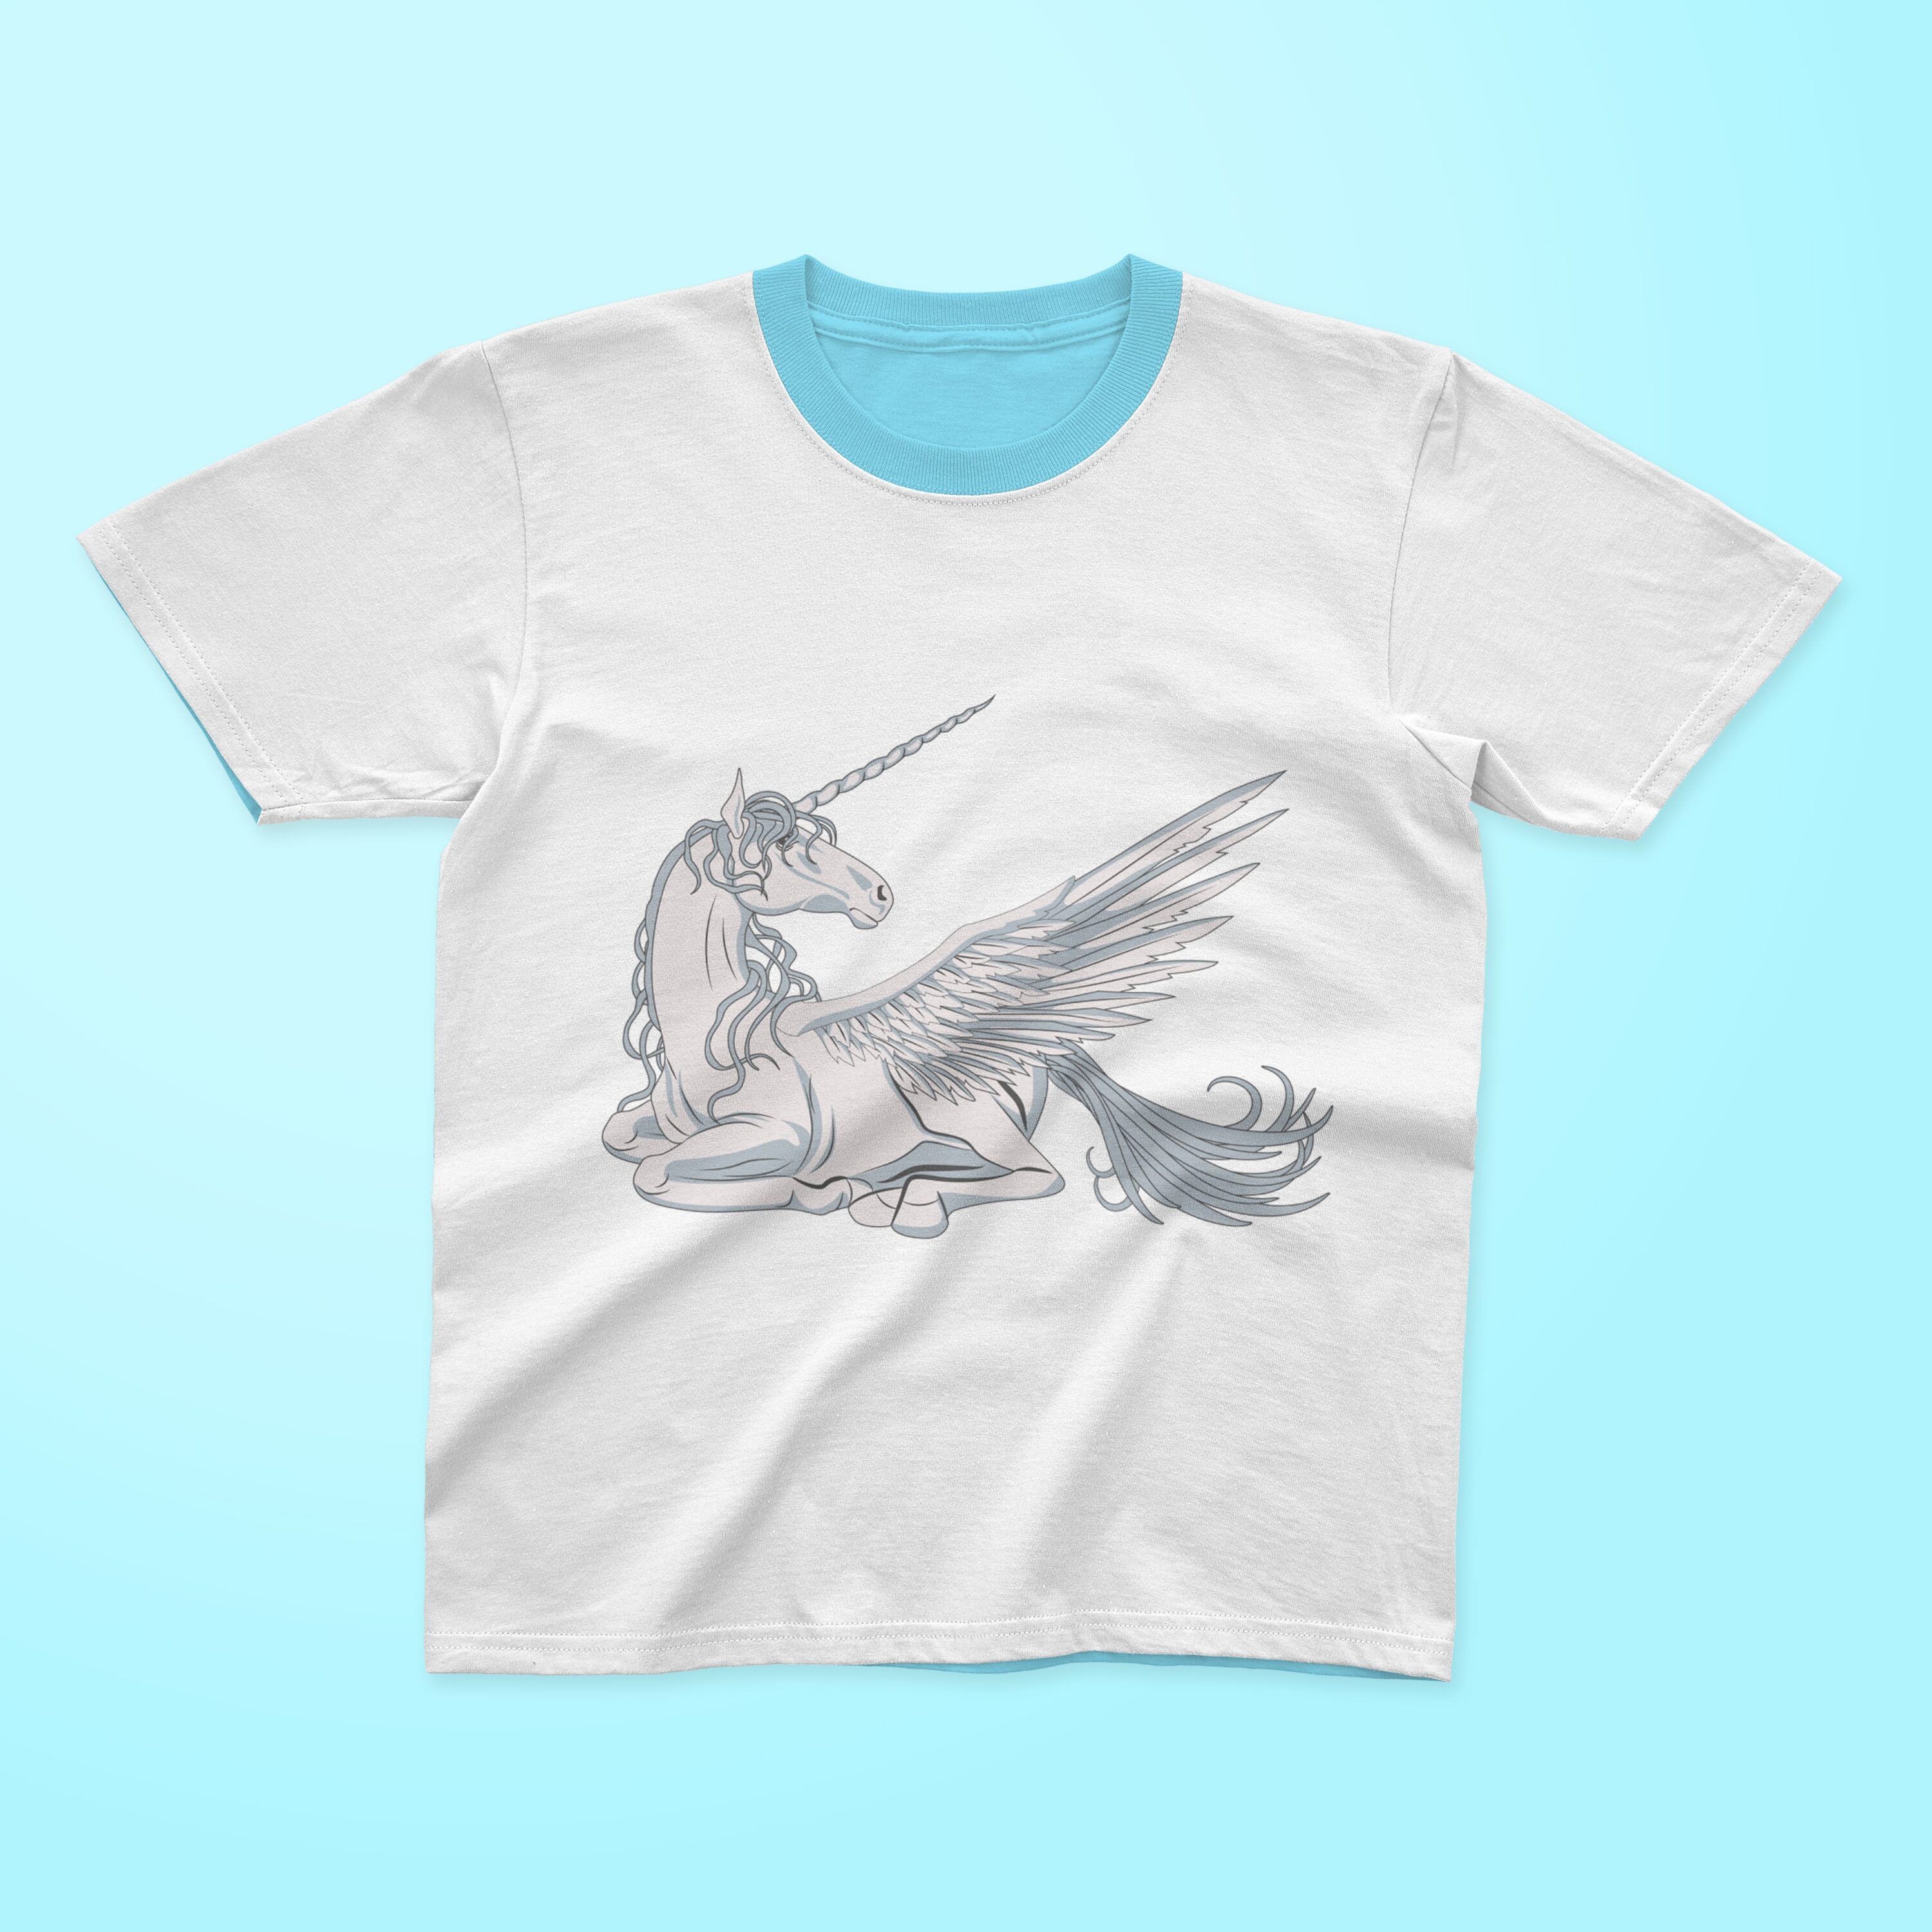 White t-shirt with a blue collar and an image of a lying unicorn on a light blue background.